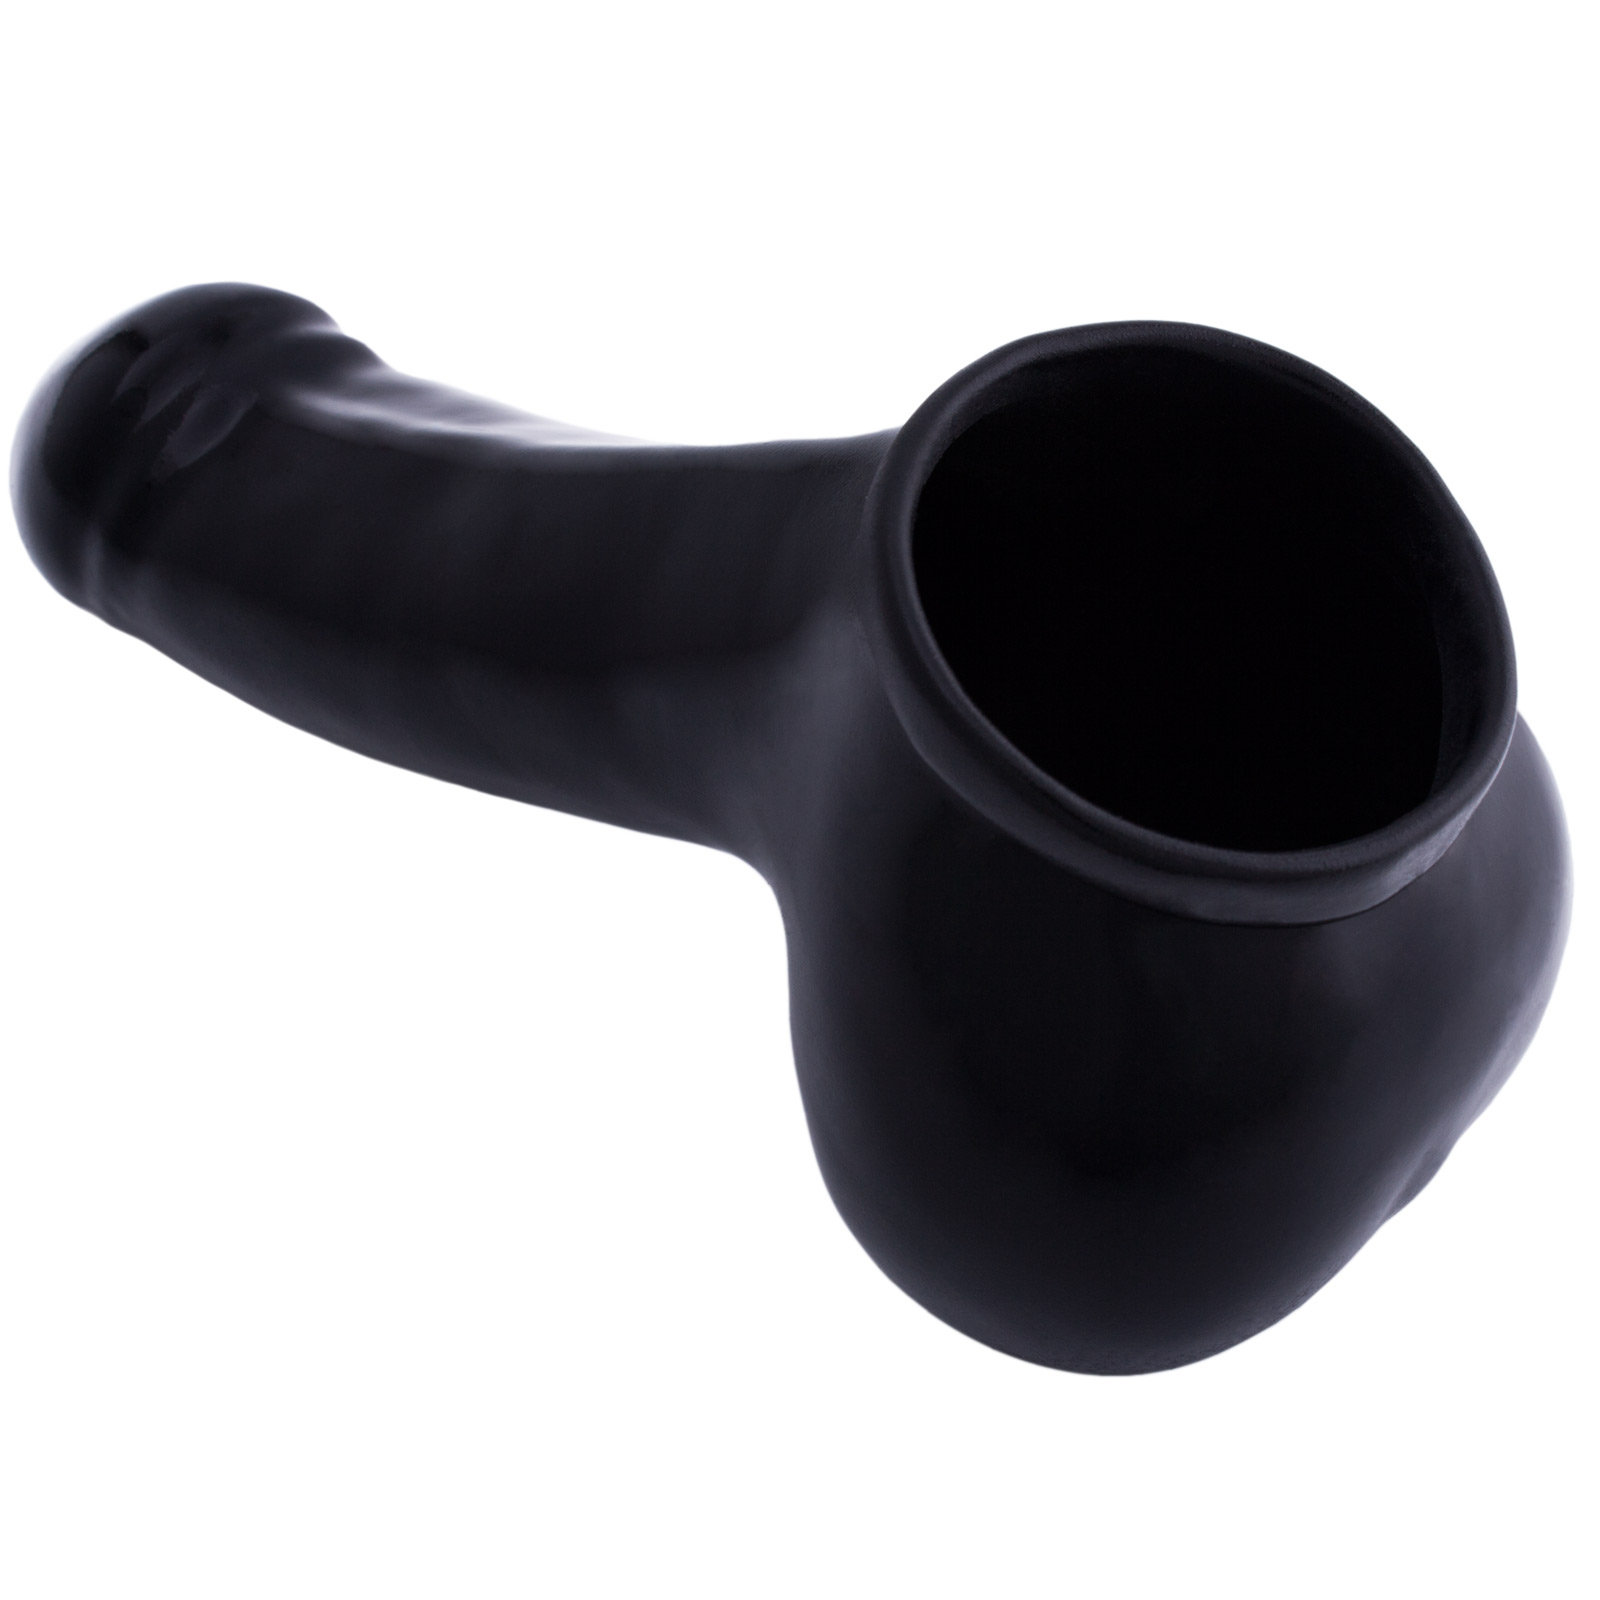 Toylie Latex Penis Sleeve «ADAM 4.5» black, with molded glans and scrotum - suitable for vegans